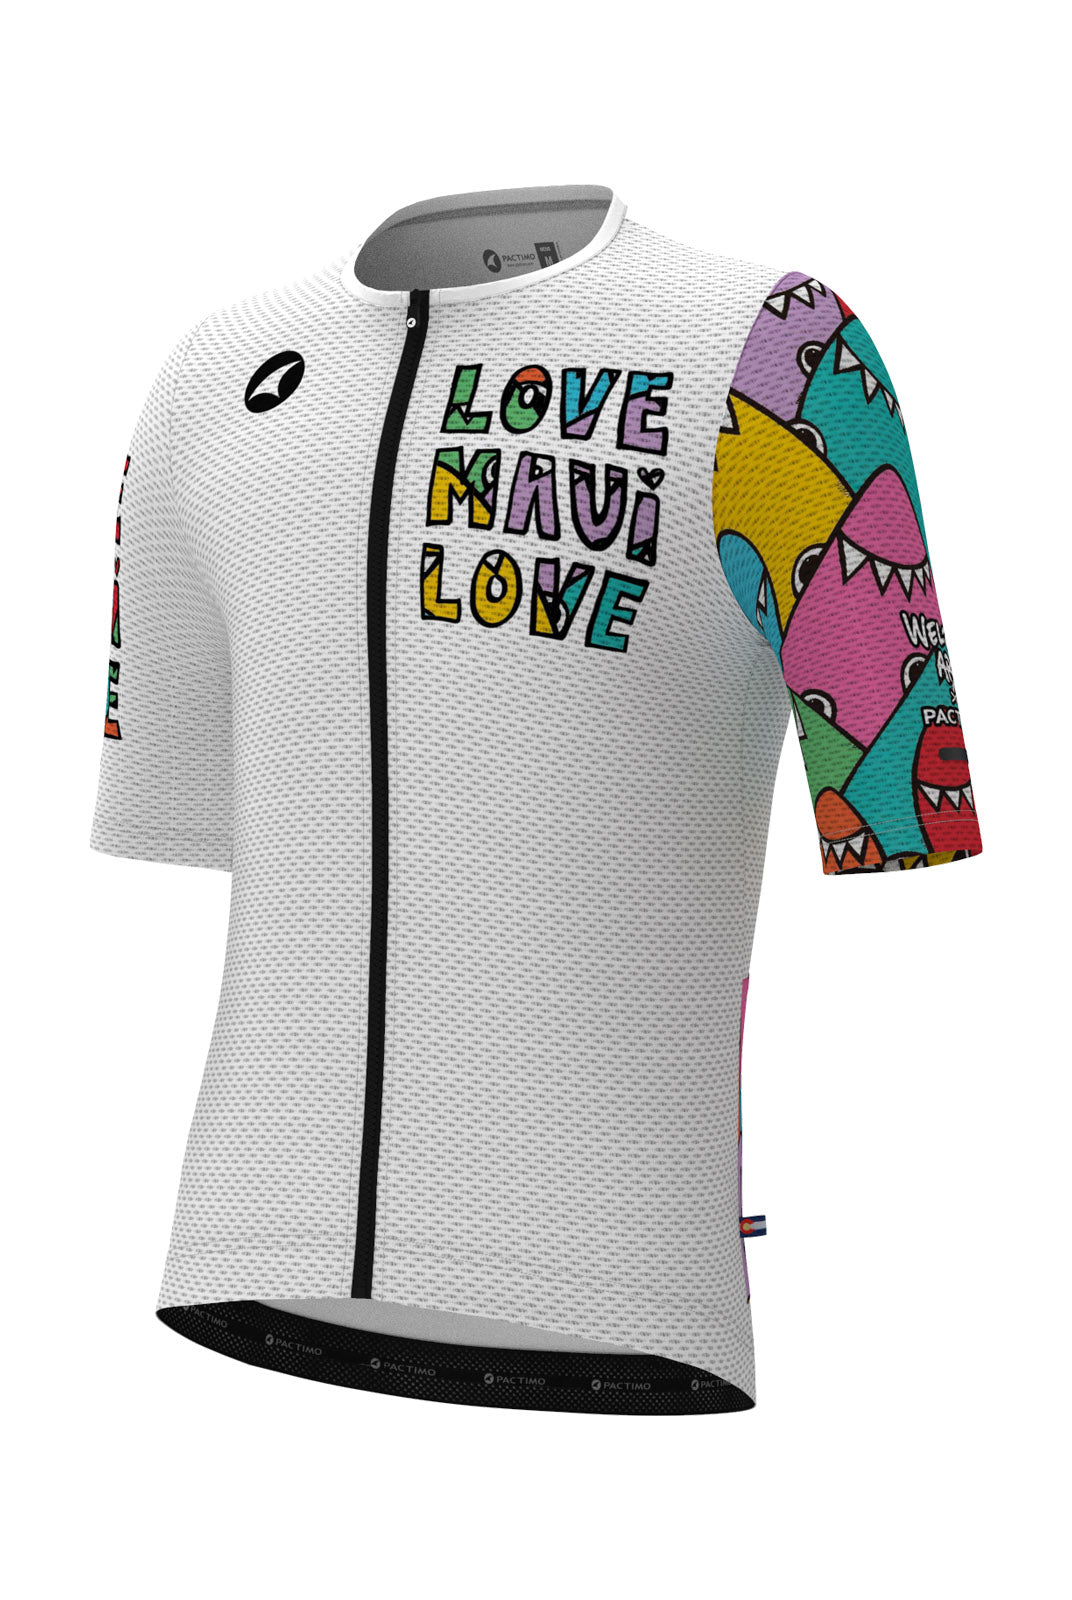 Men's Summer Cycling Jersey - White Welzie Design - Front View #color_love-maui-love-white